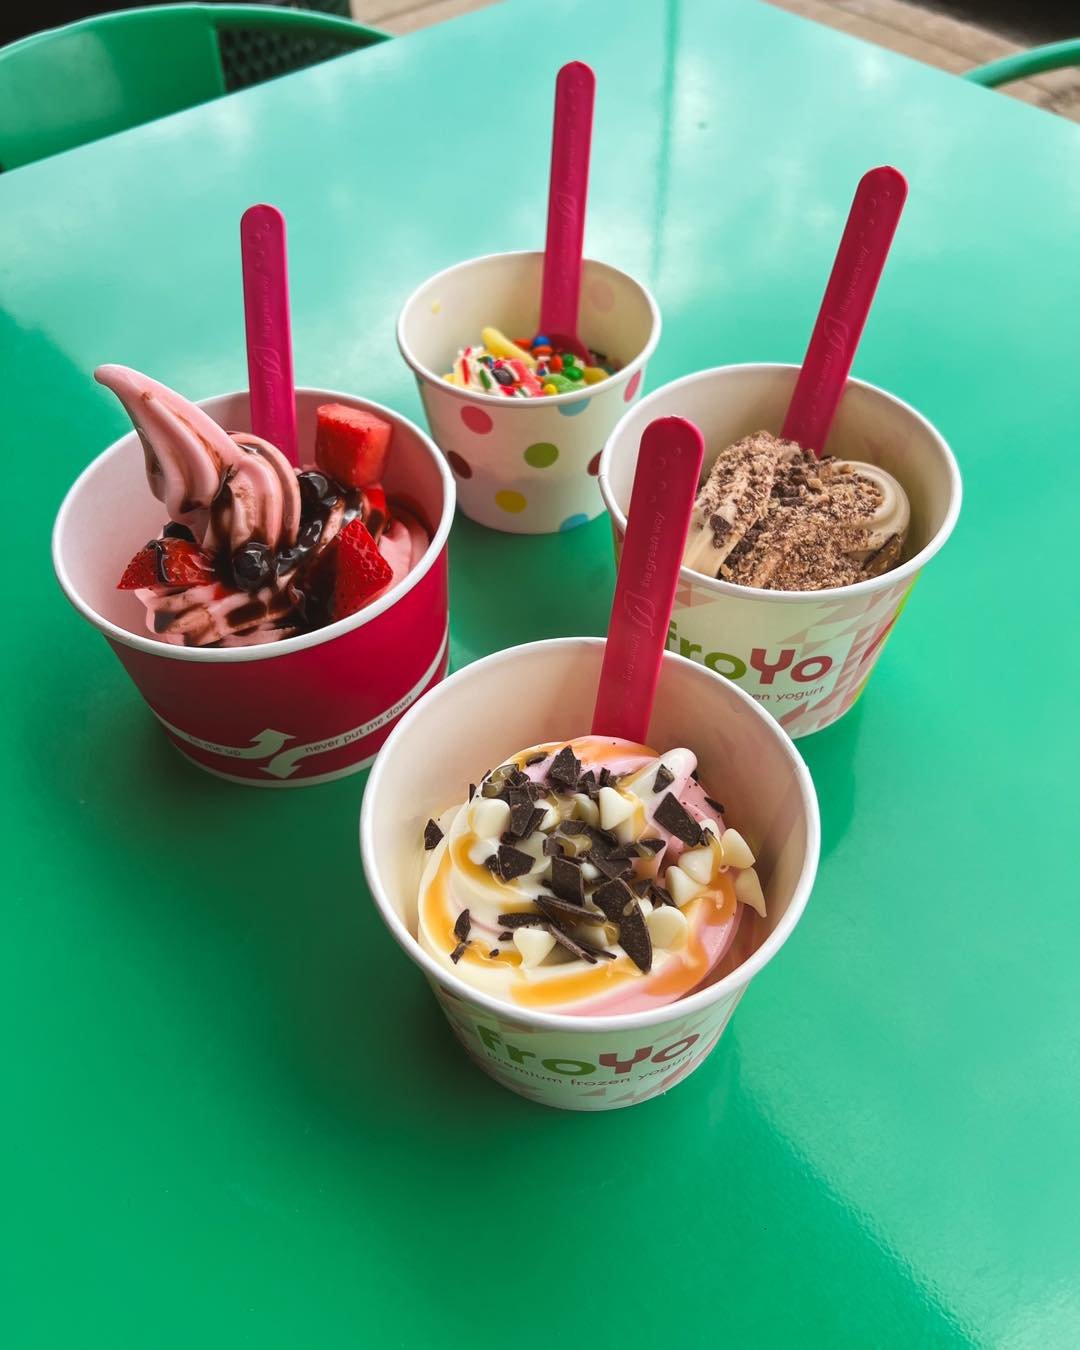 🌸 Celebrating the sweetest moments with the sweetest moms! Treat your mom to a delightful froyo today and make her day as special as she is! Buy two cups and get 10 oz off a cup &mdash; because today, every swirl is a token of love! 💕 #MothersDayTr